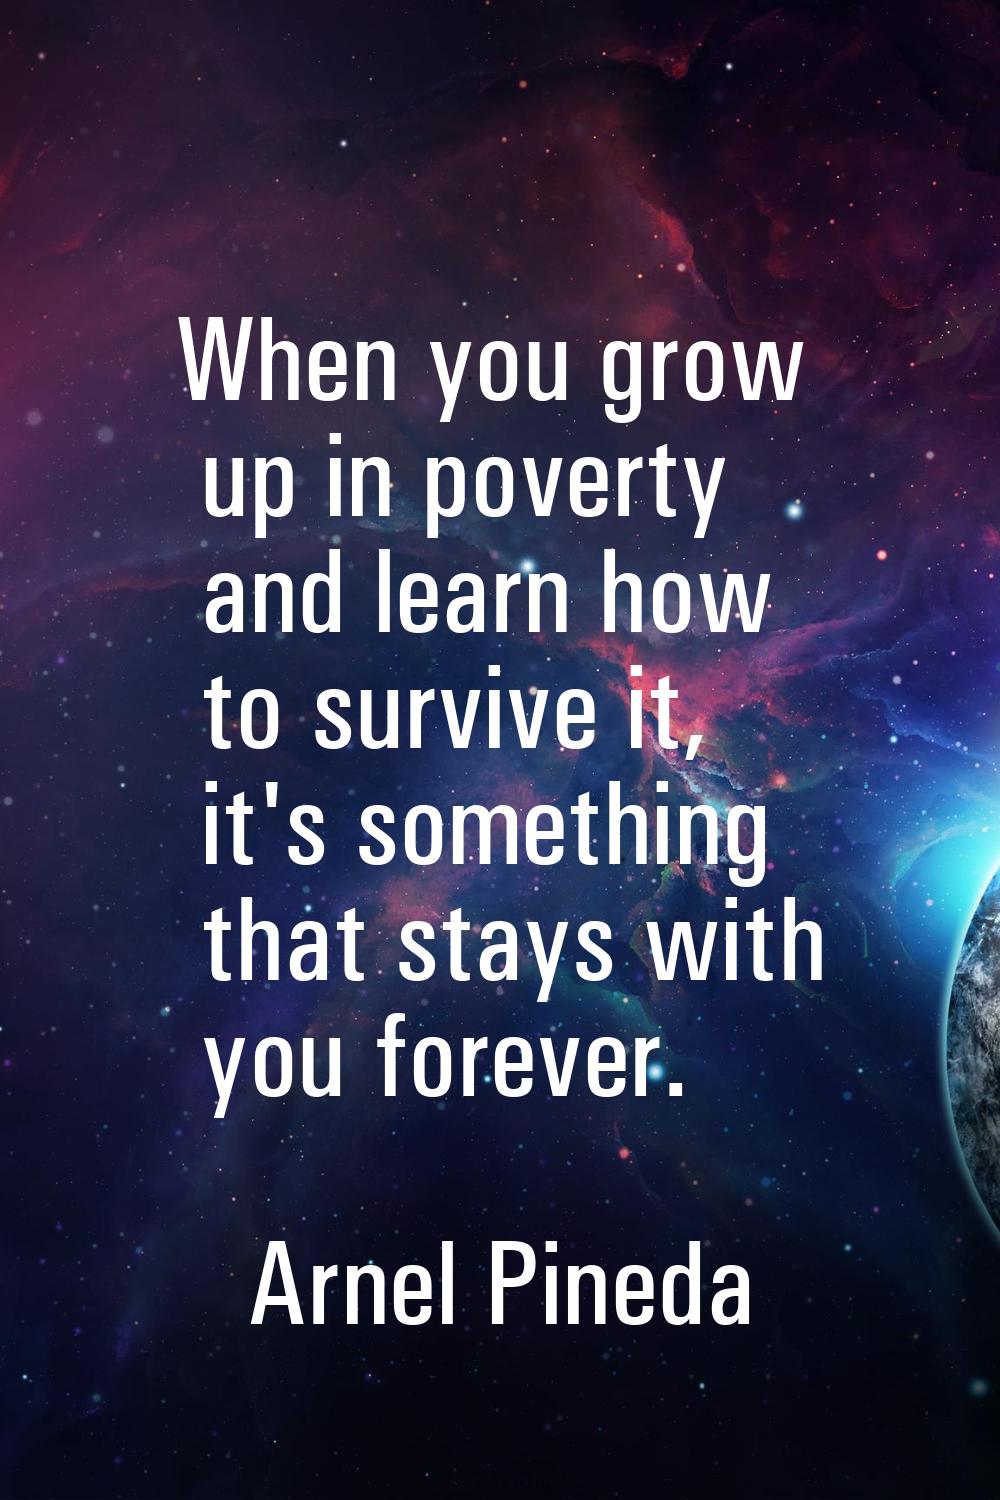 When you grow up in poverty and learn how to survive it, it's something that stays with you forever